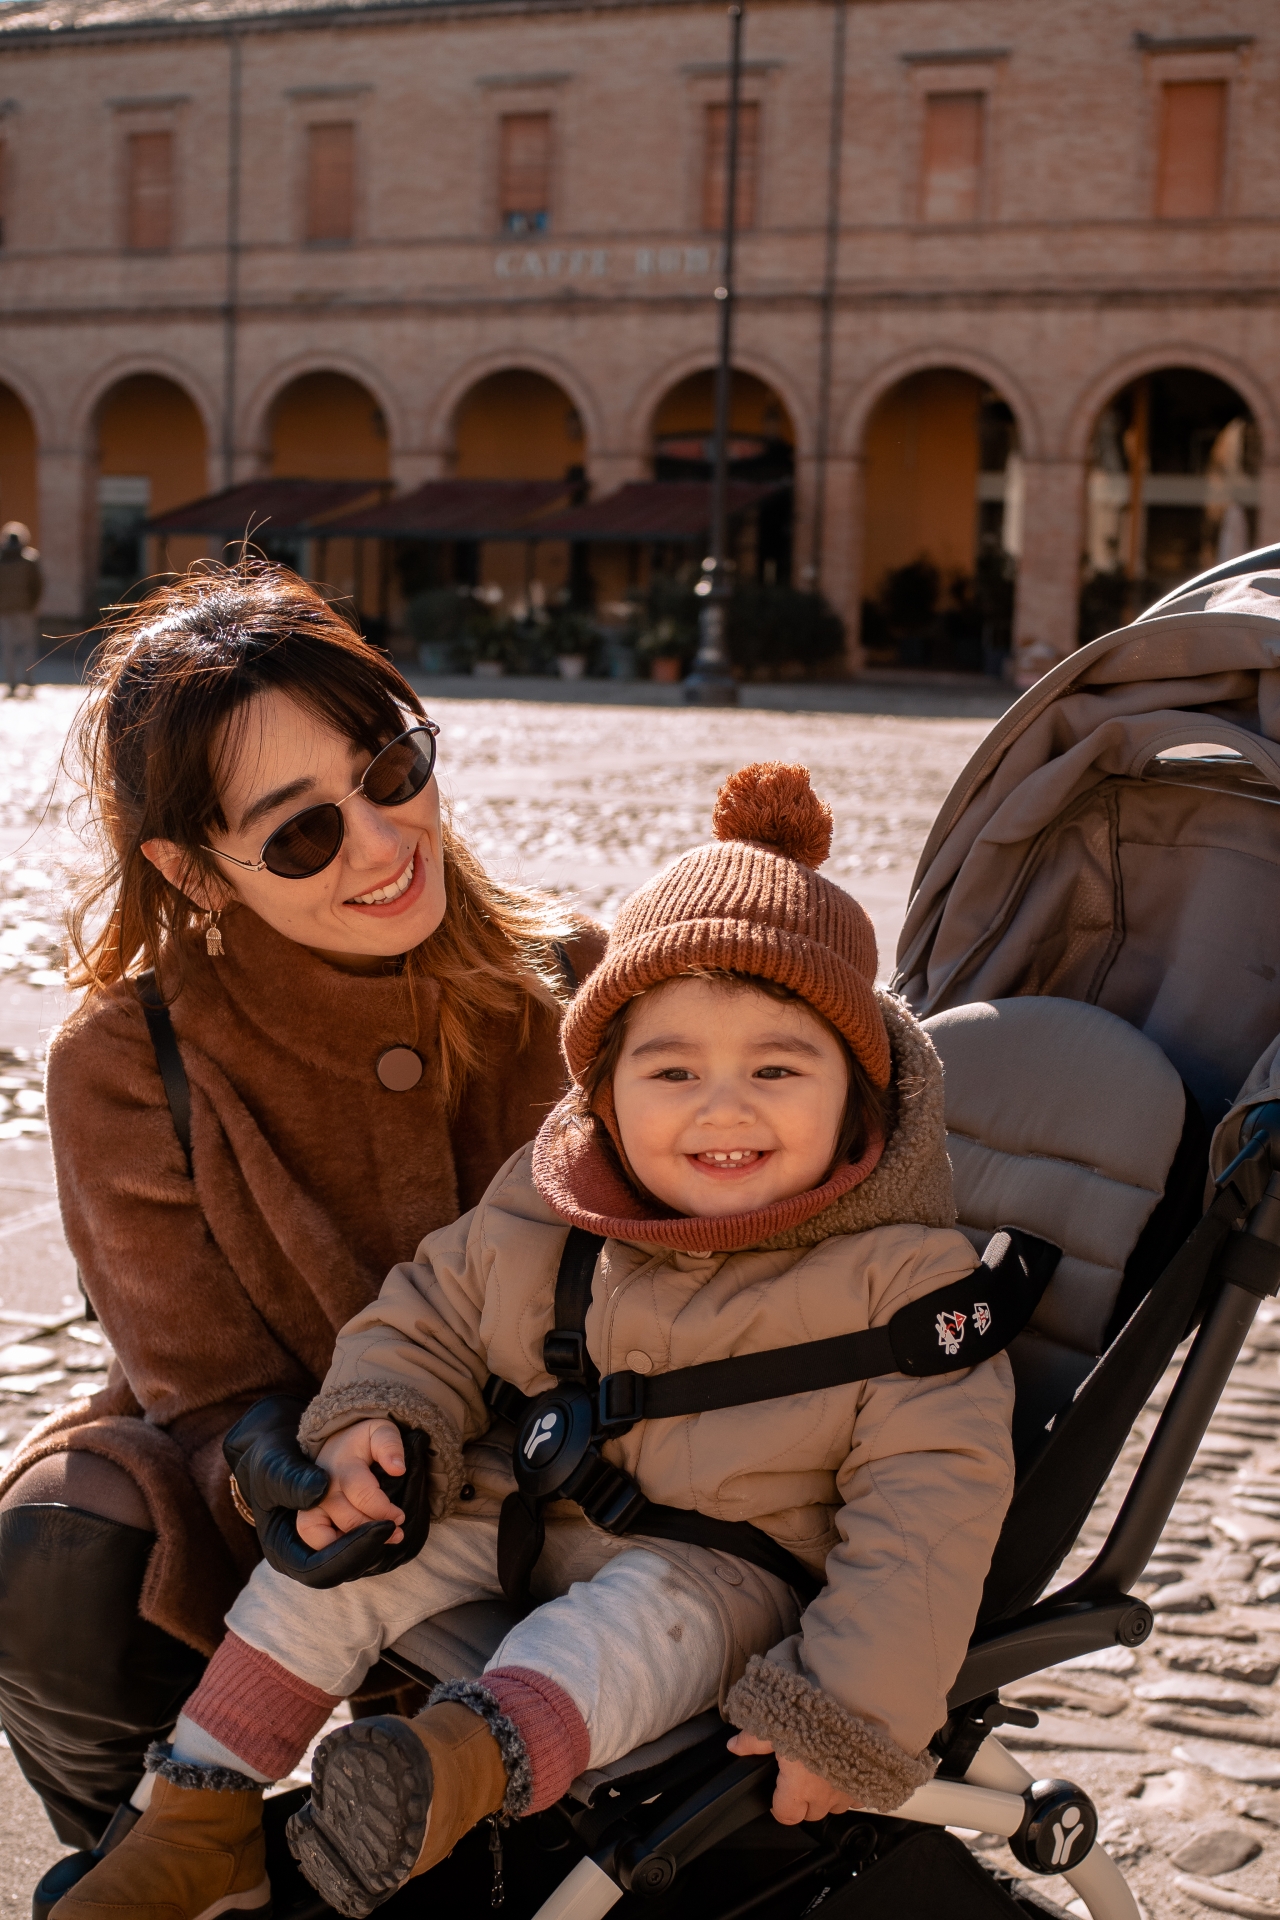 ﻿Family photosession of mother and son in cozy Santarcangelo